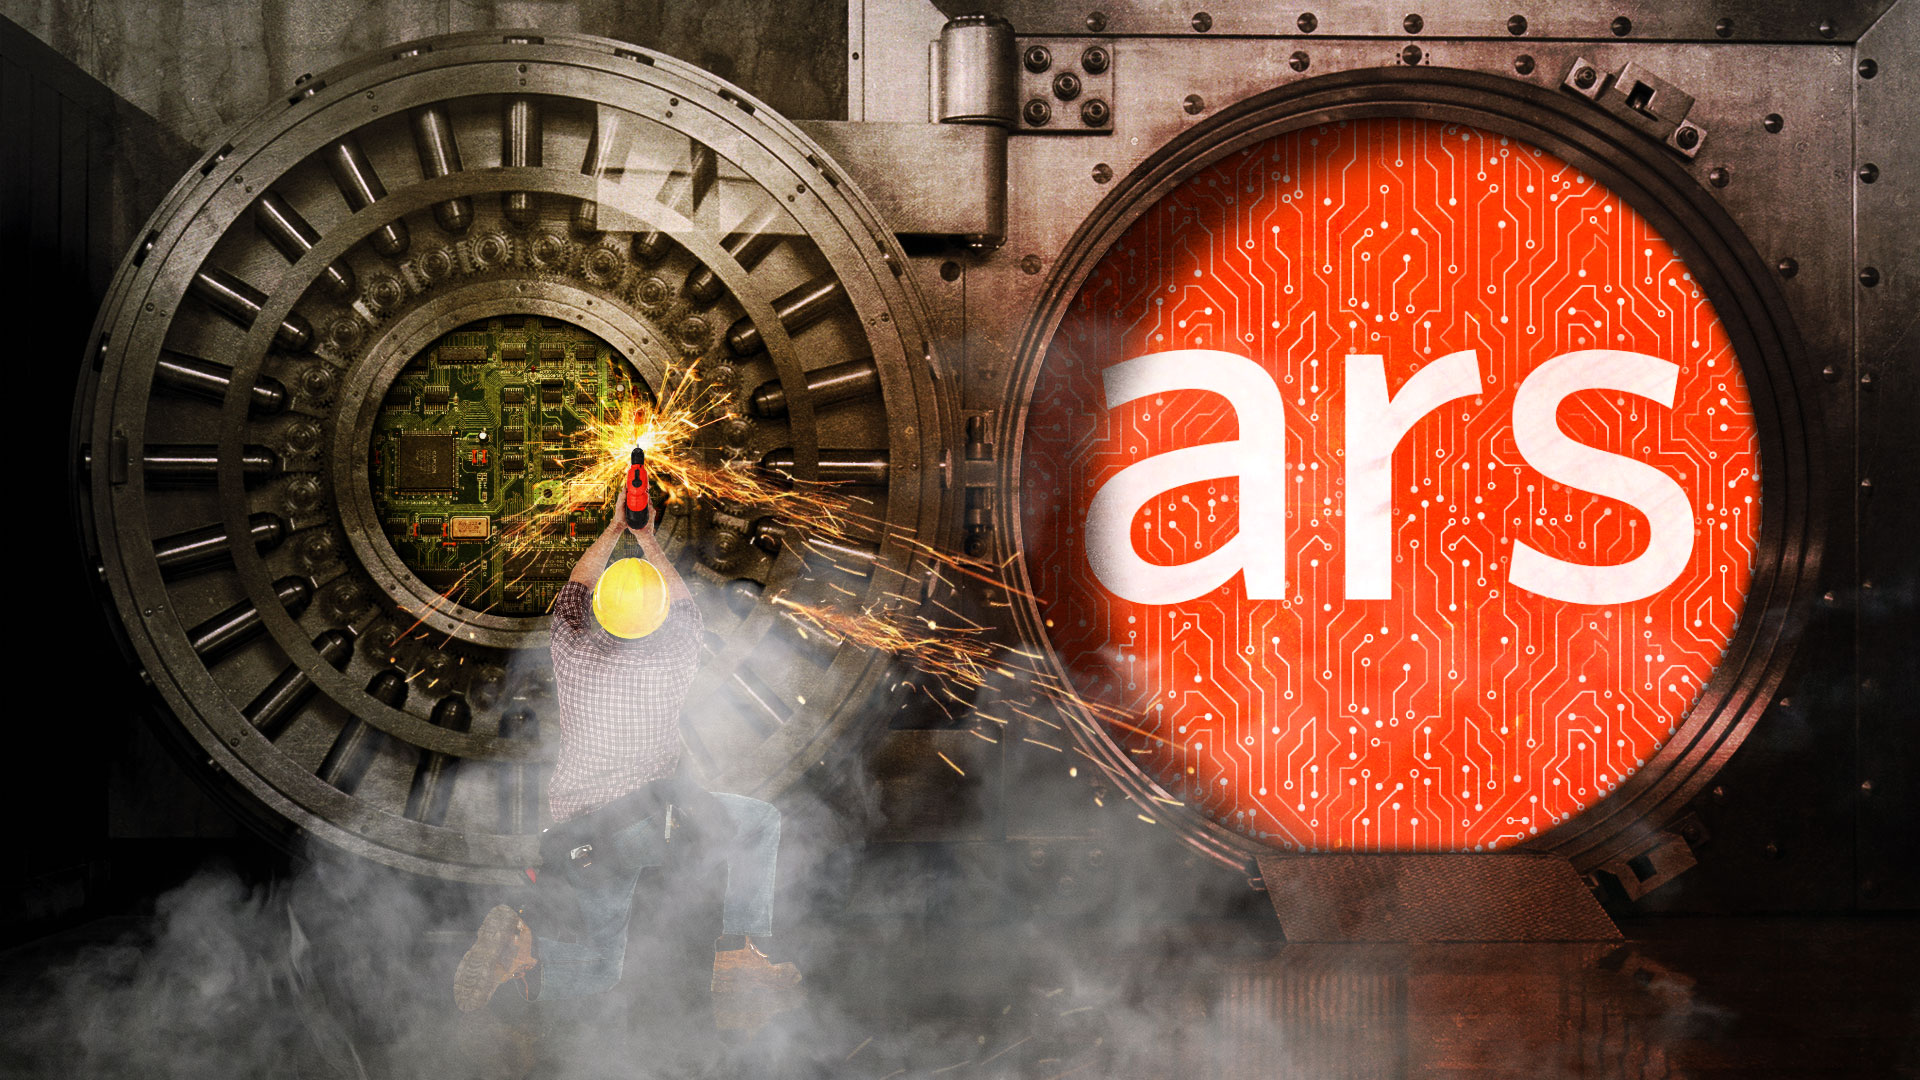 Behind the scenes: How we host Ars Technica, part 1